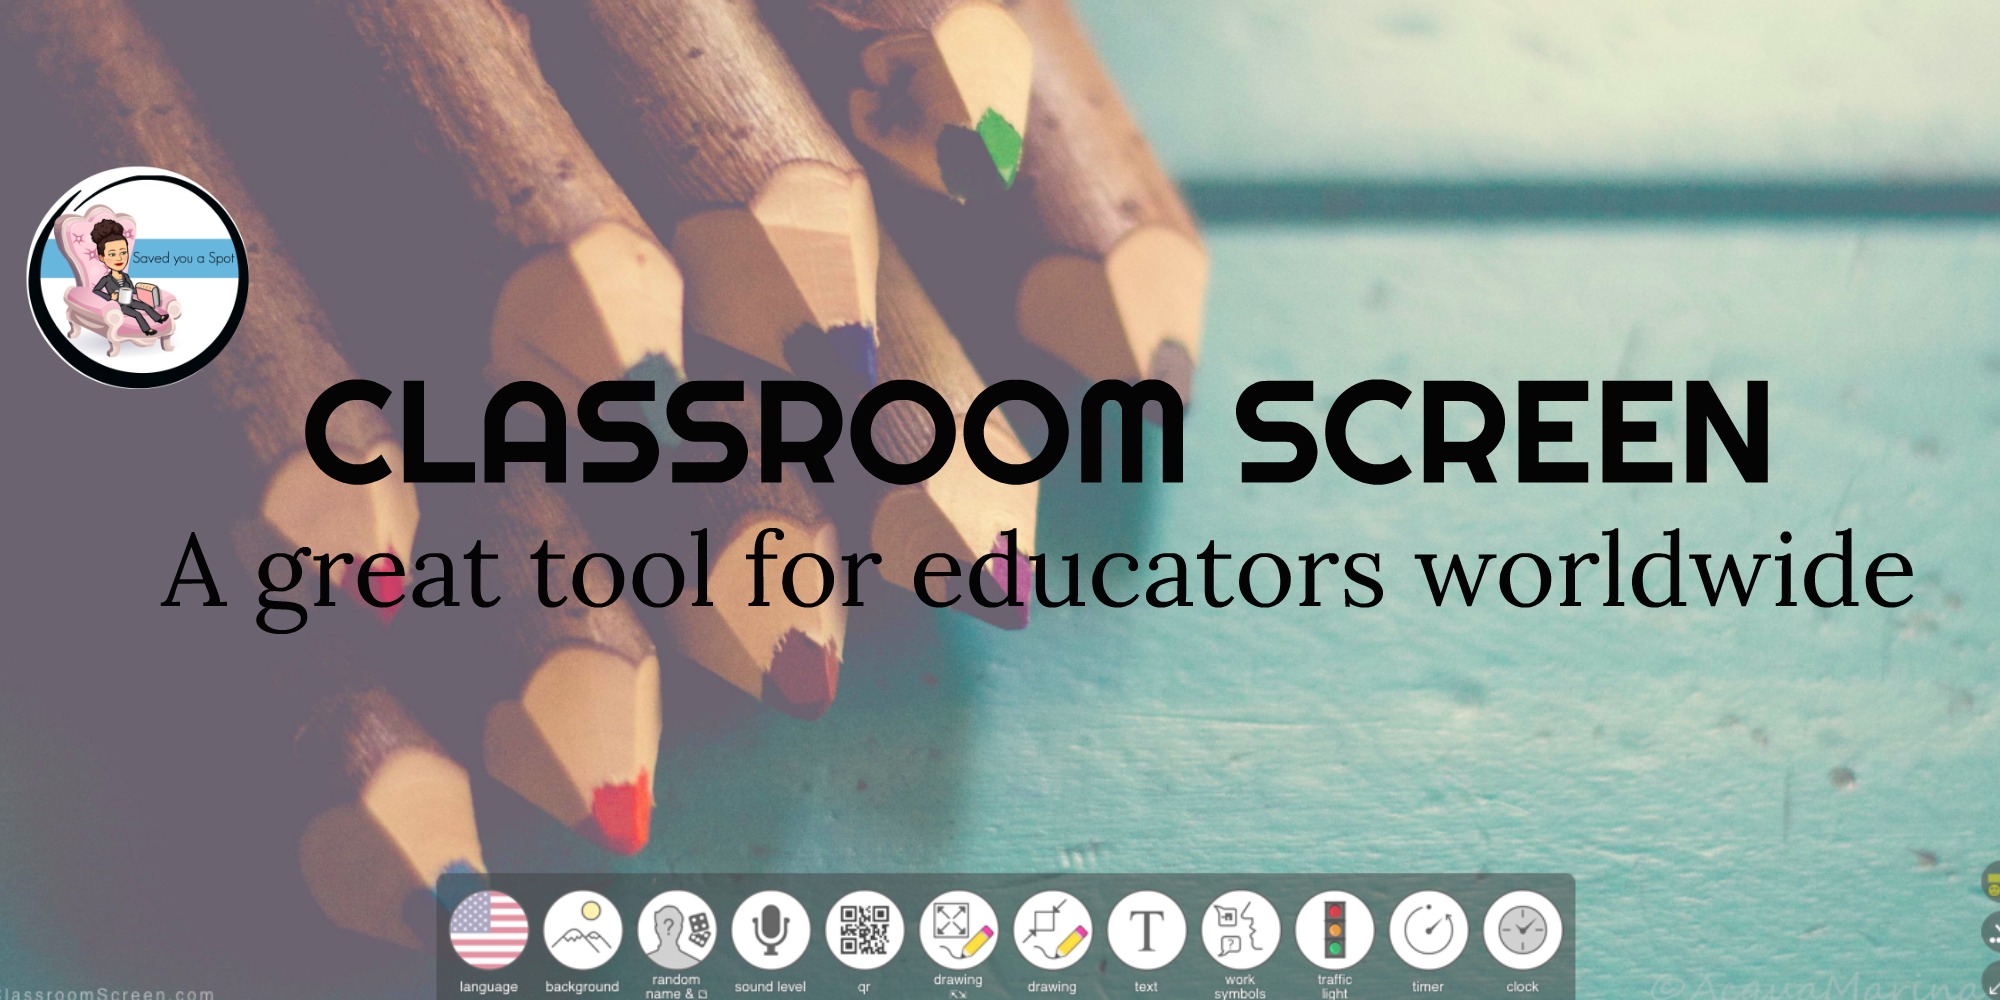 Classroom Screen – A Great Tool for Educators Worldwide – Saved You a Spot